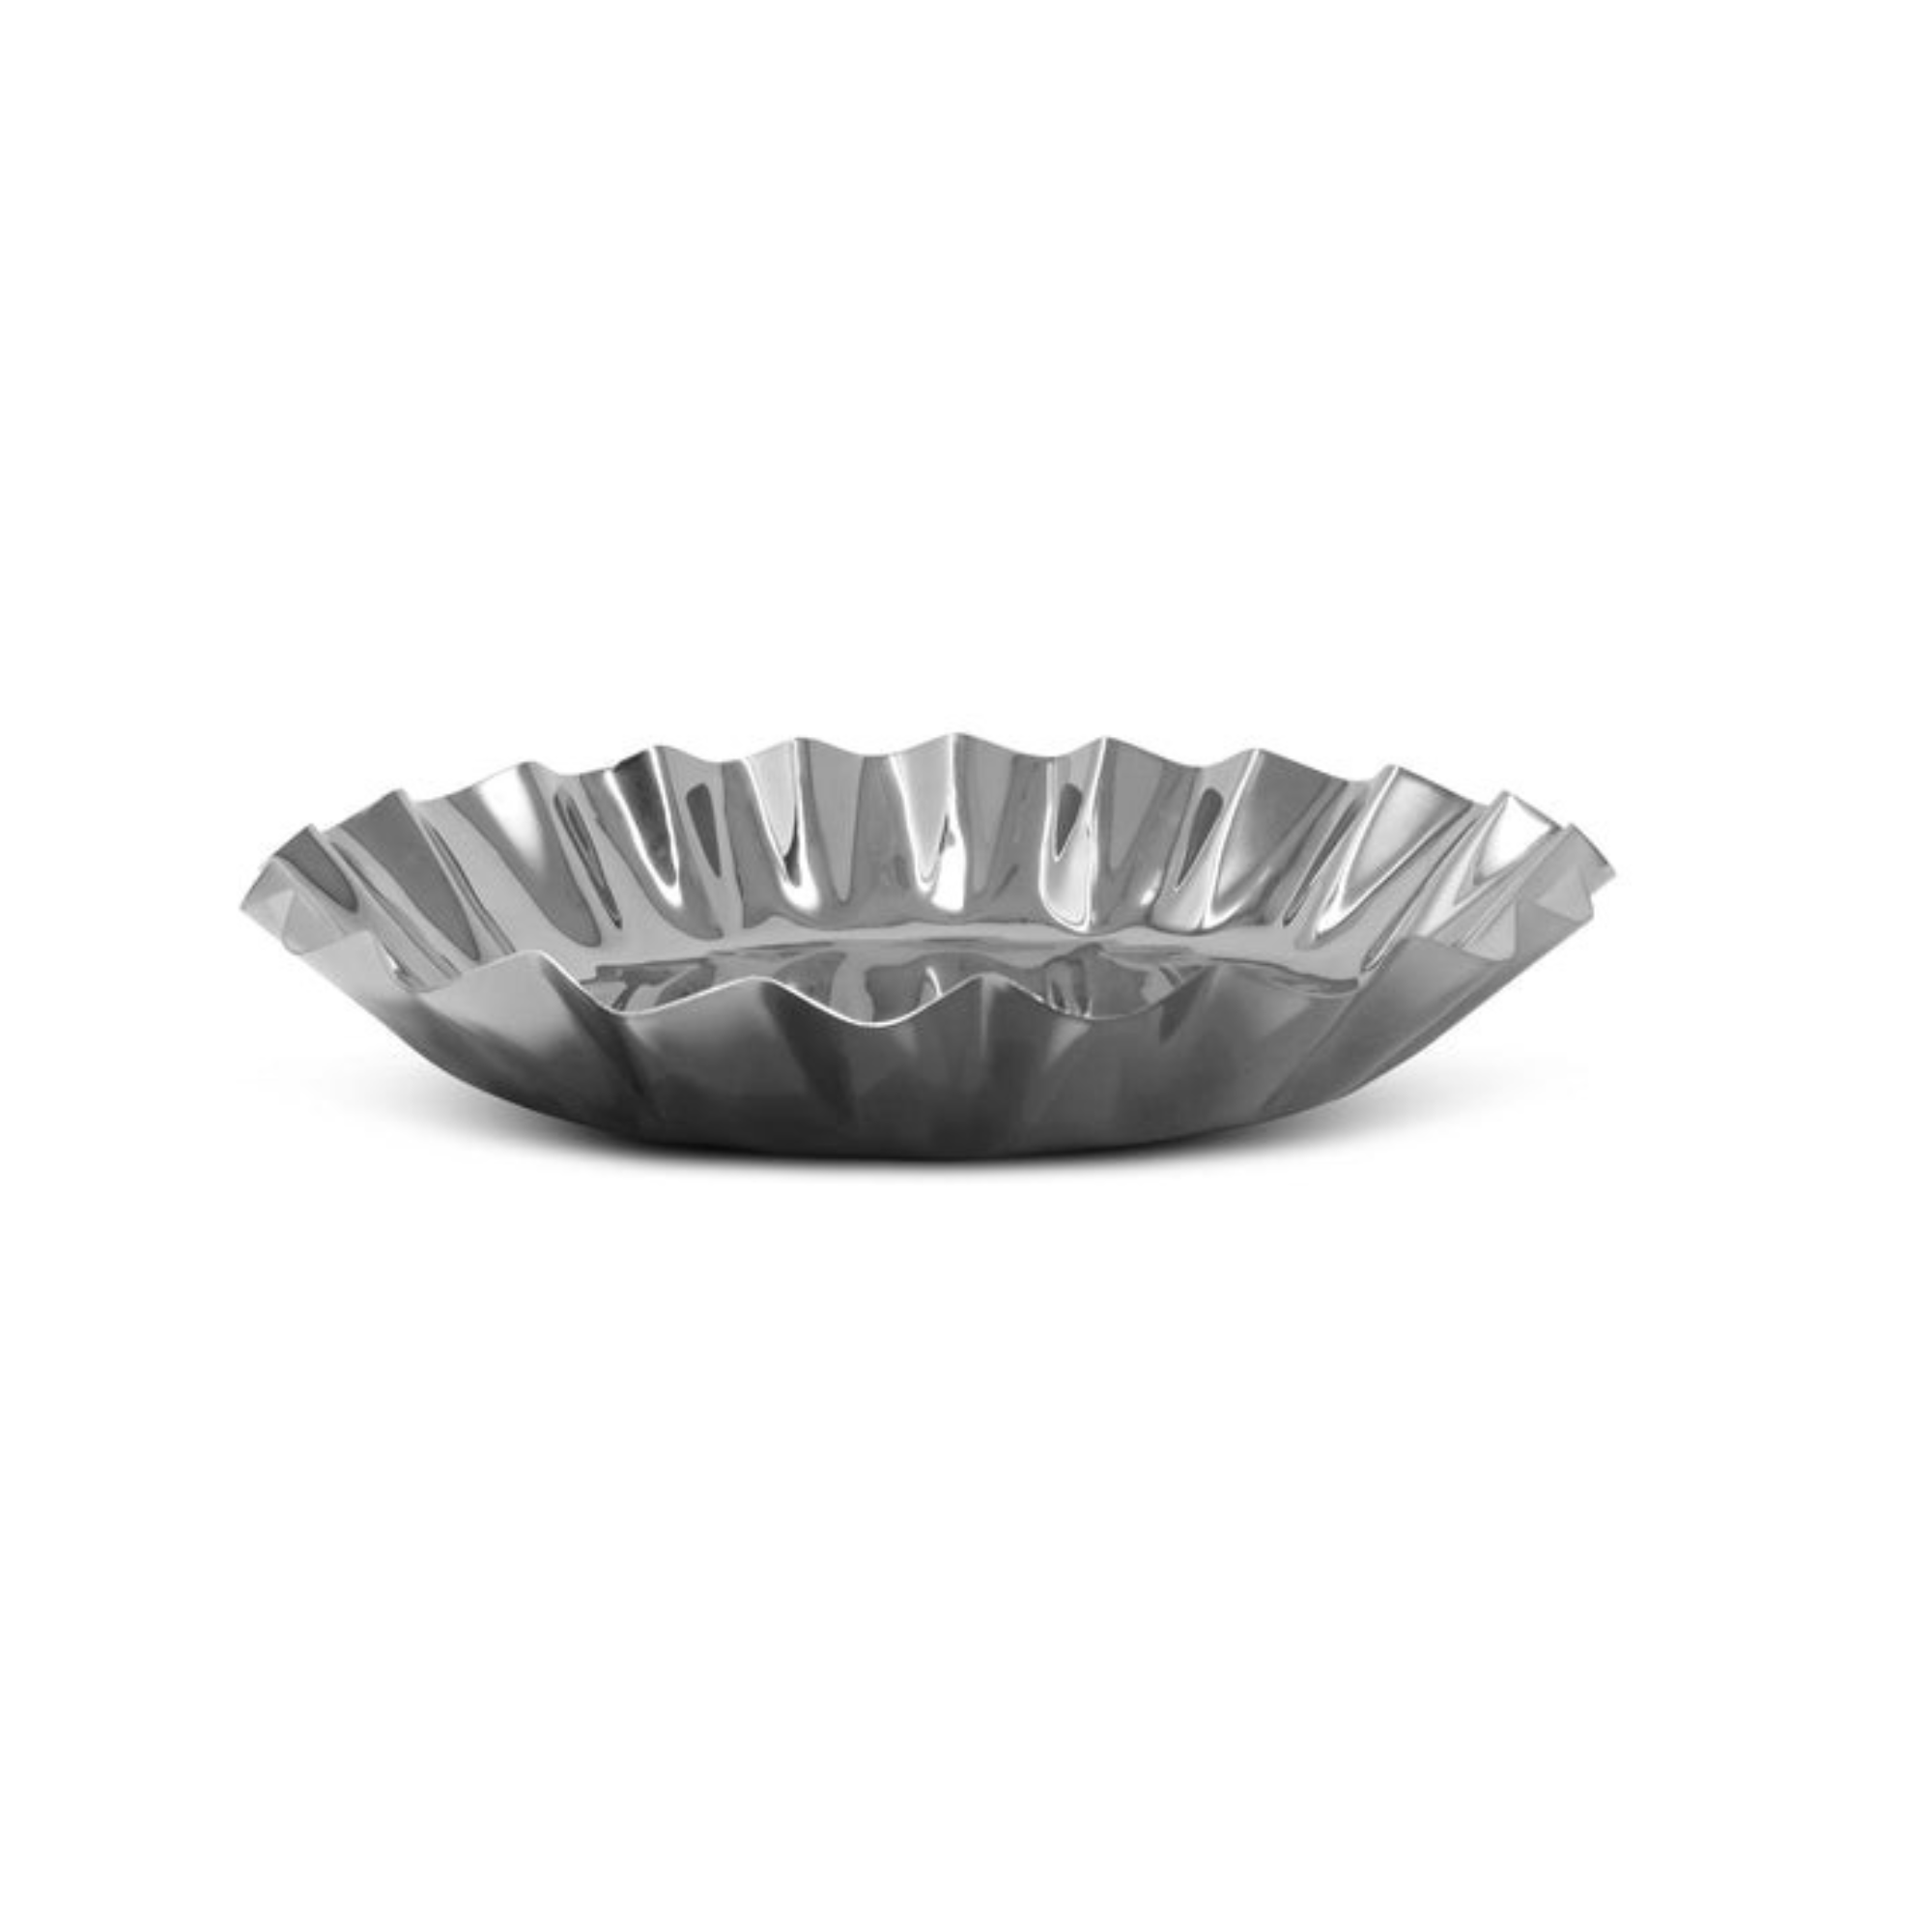 Stainless Steel Tray With Wavy Edge, 14.25"D